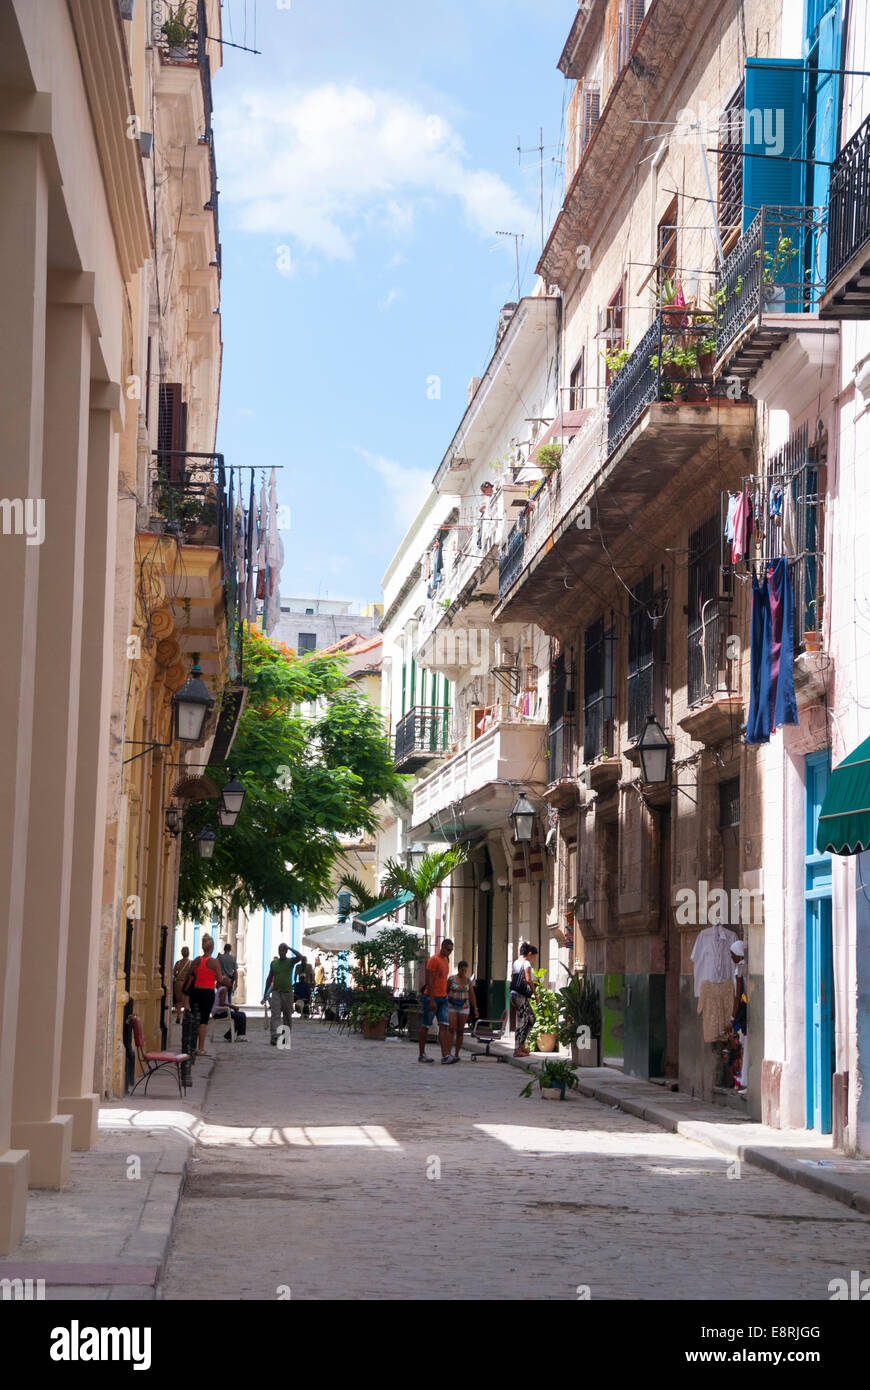 Spanish colonial architecture and narrow streets in the old section of Havana Cuba. Stock Photo